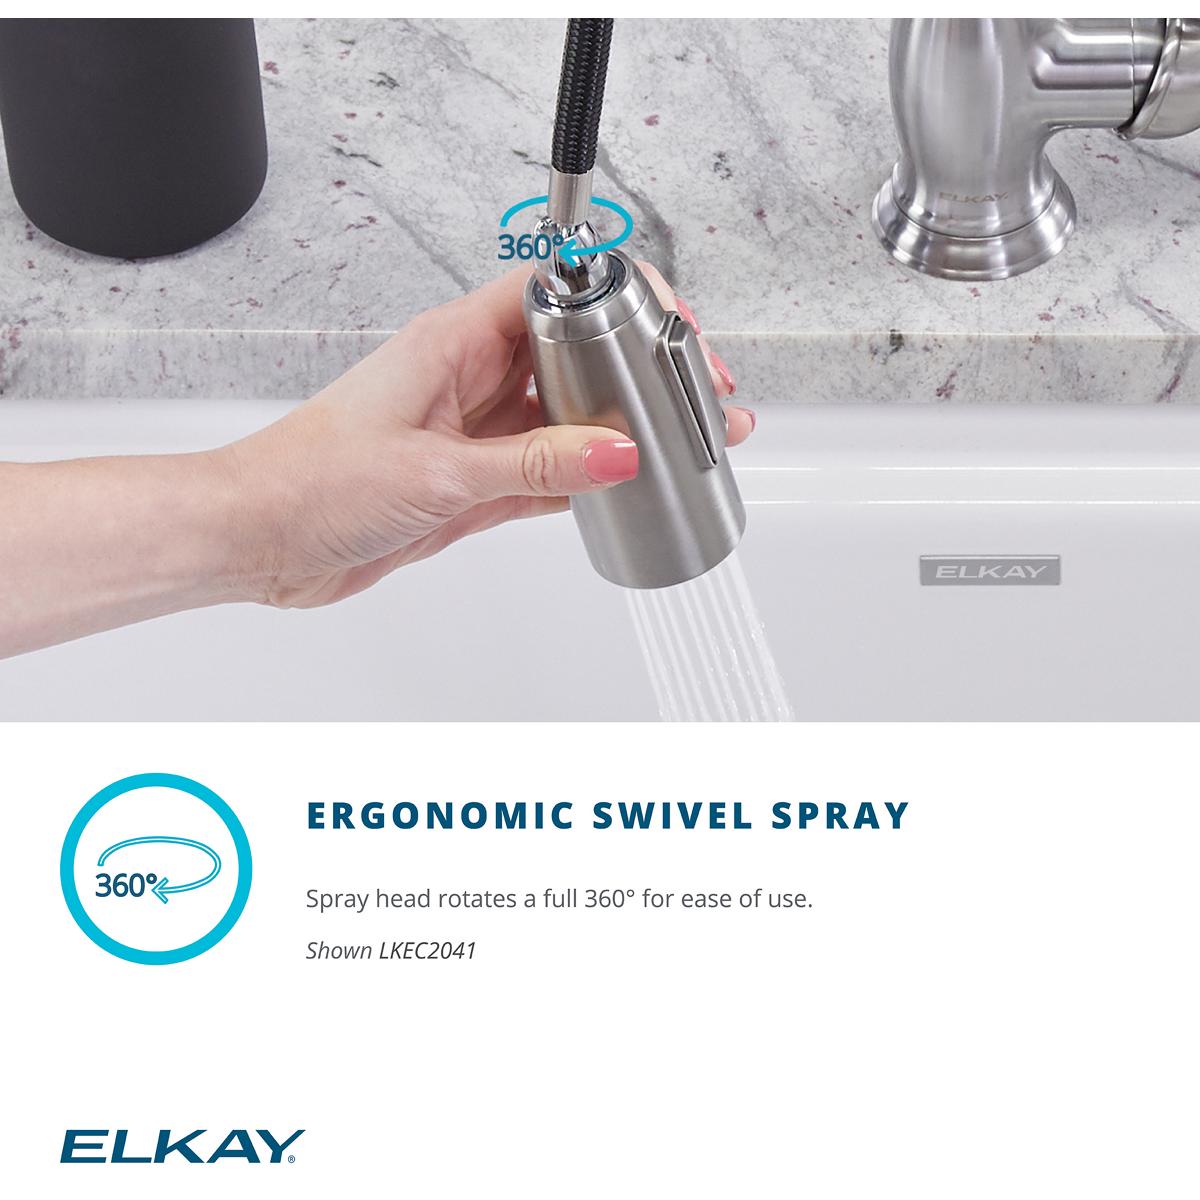 Elkay Explore Single Hole Kitchen Faucet with Pull-down Spray and Forward Only Lever Handle